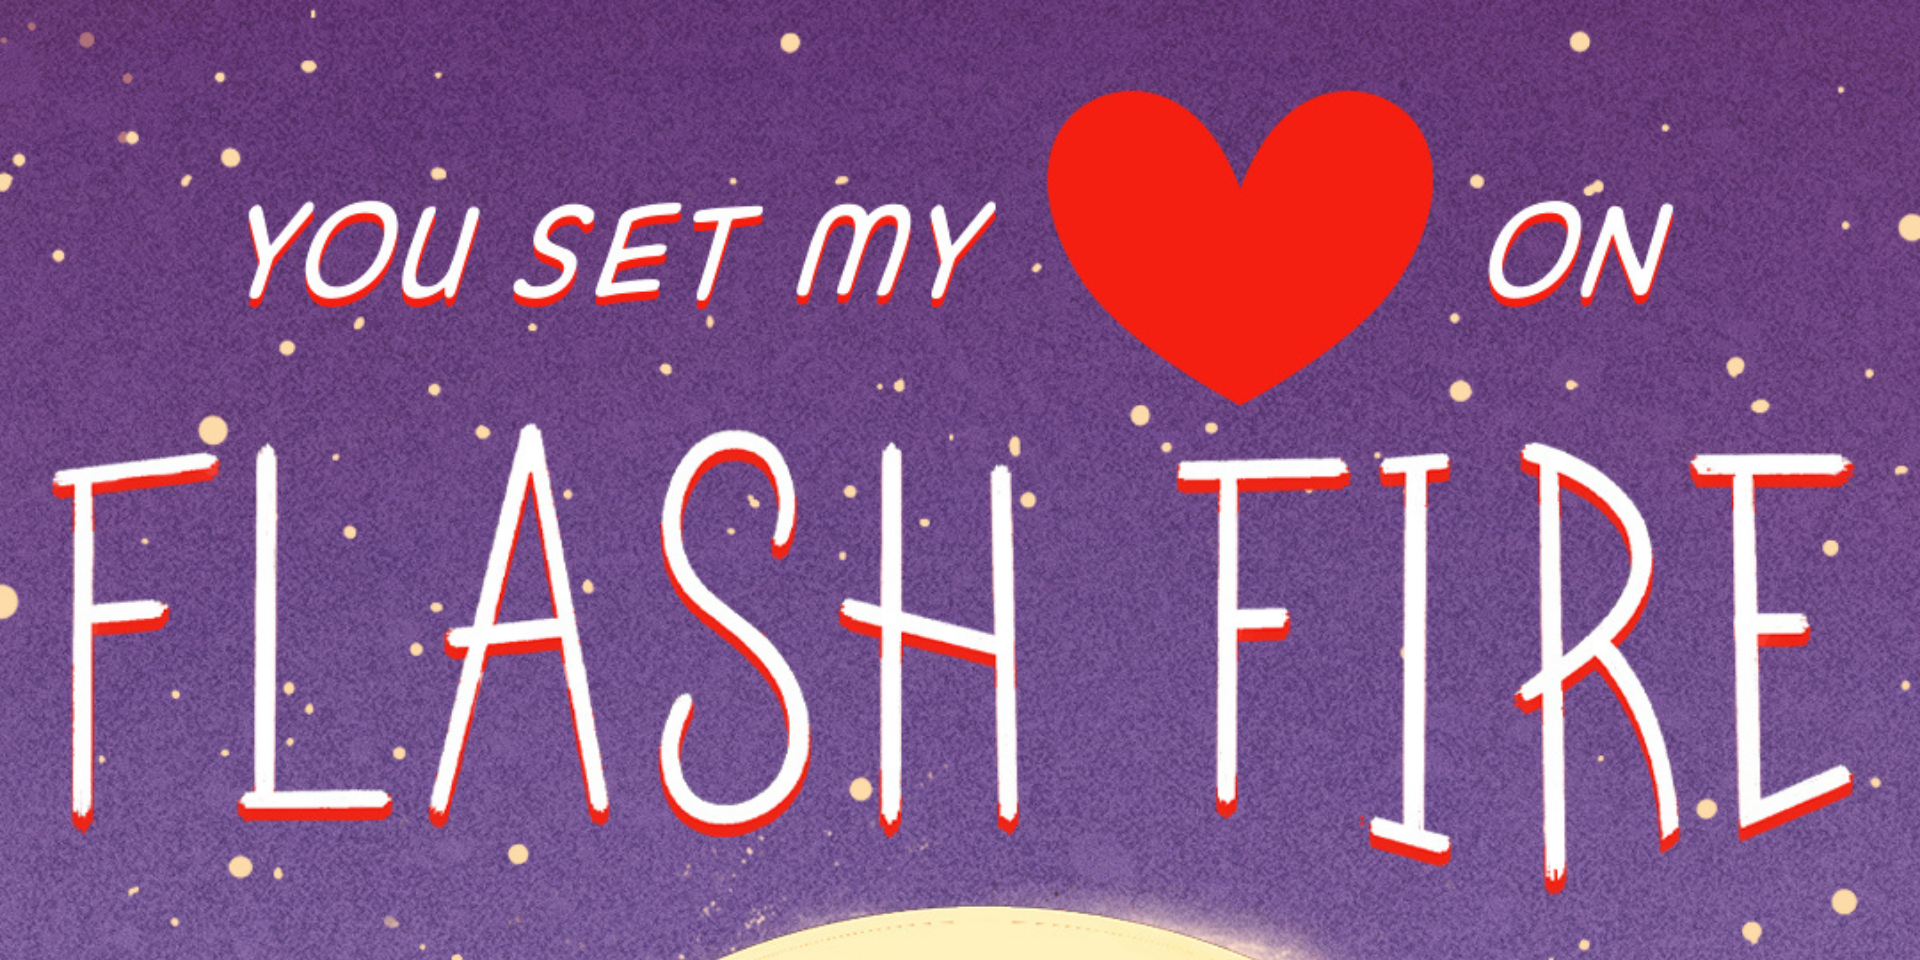 Celebrate Valentine’s Day with These Free <i>Flash Fire</i> Wallpapers!